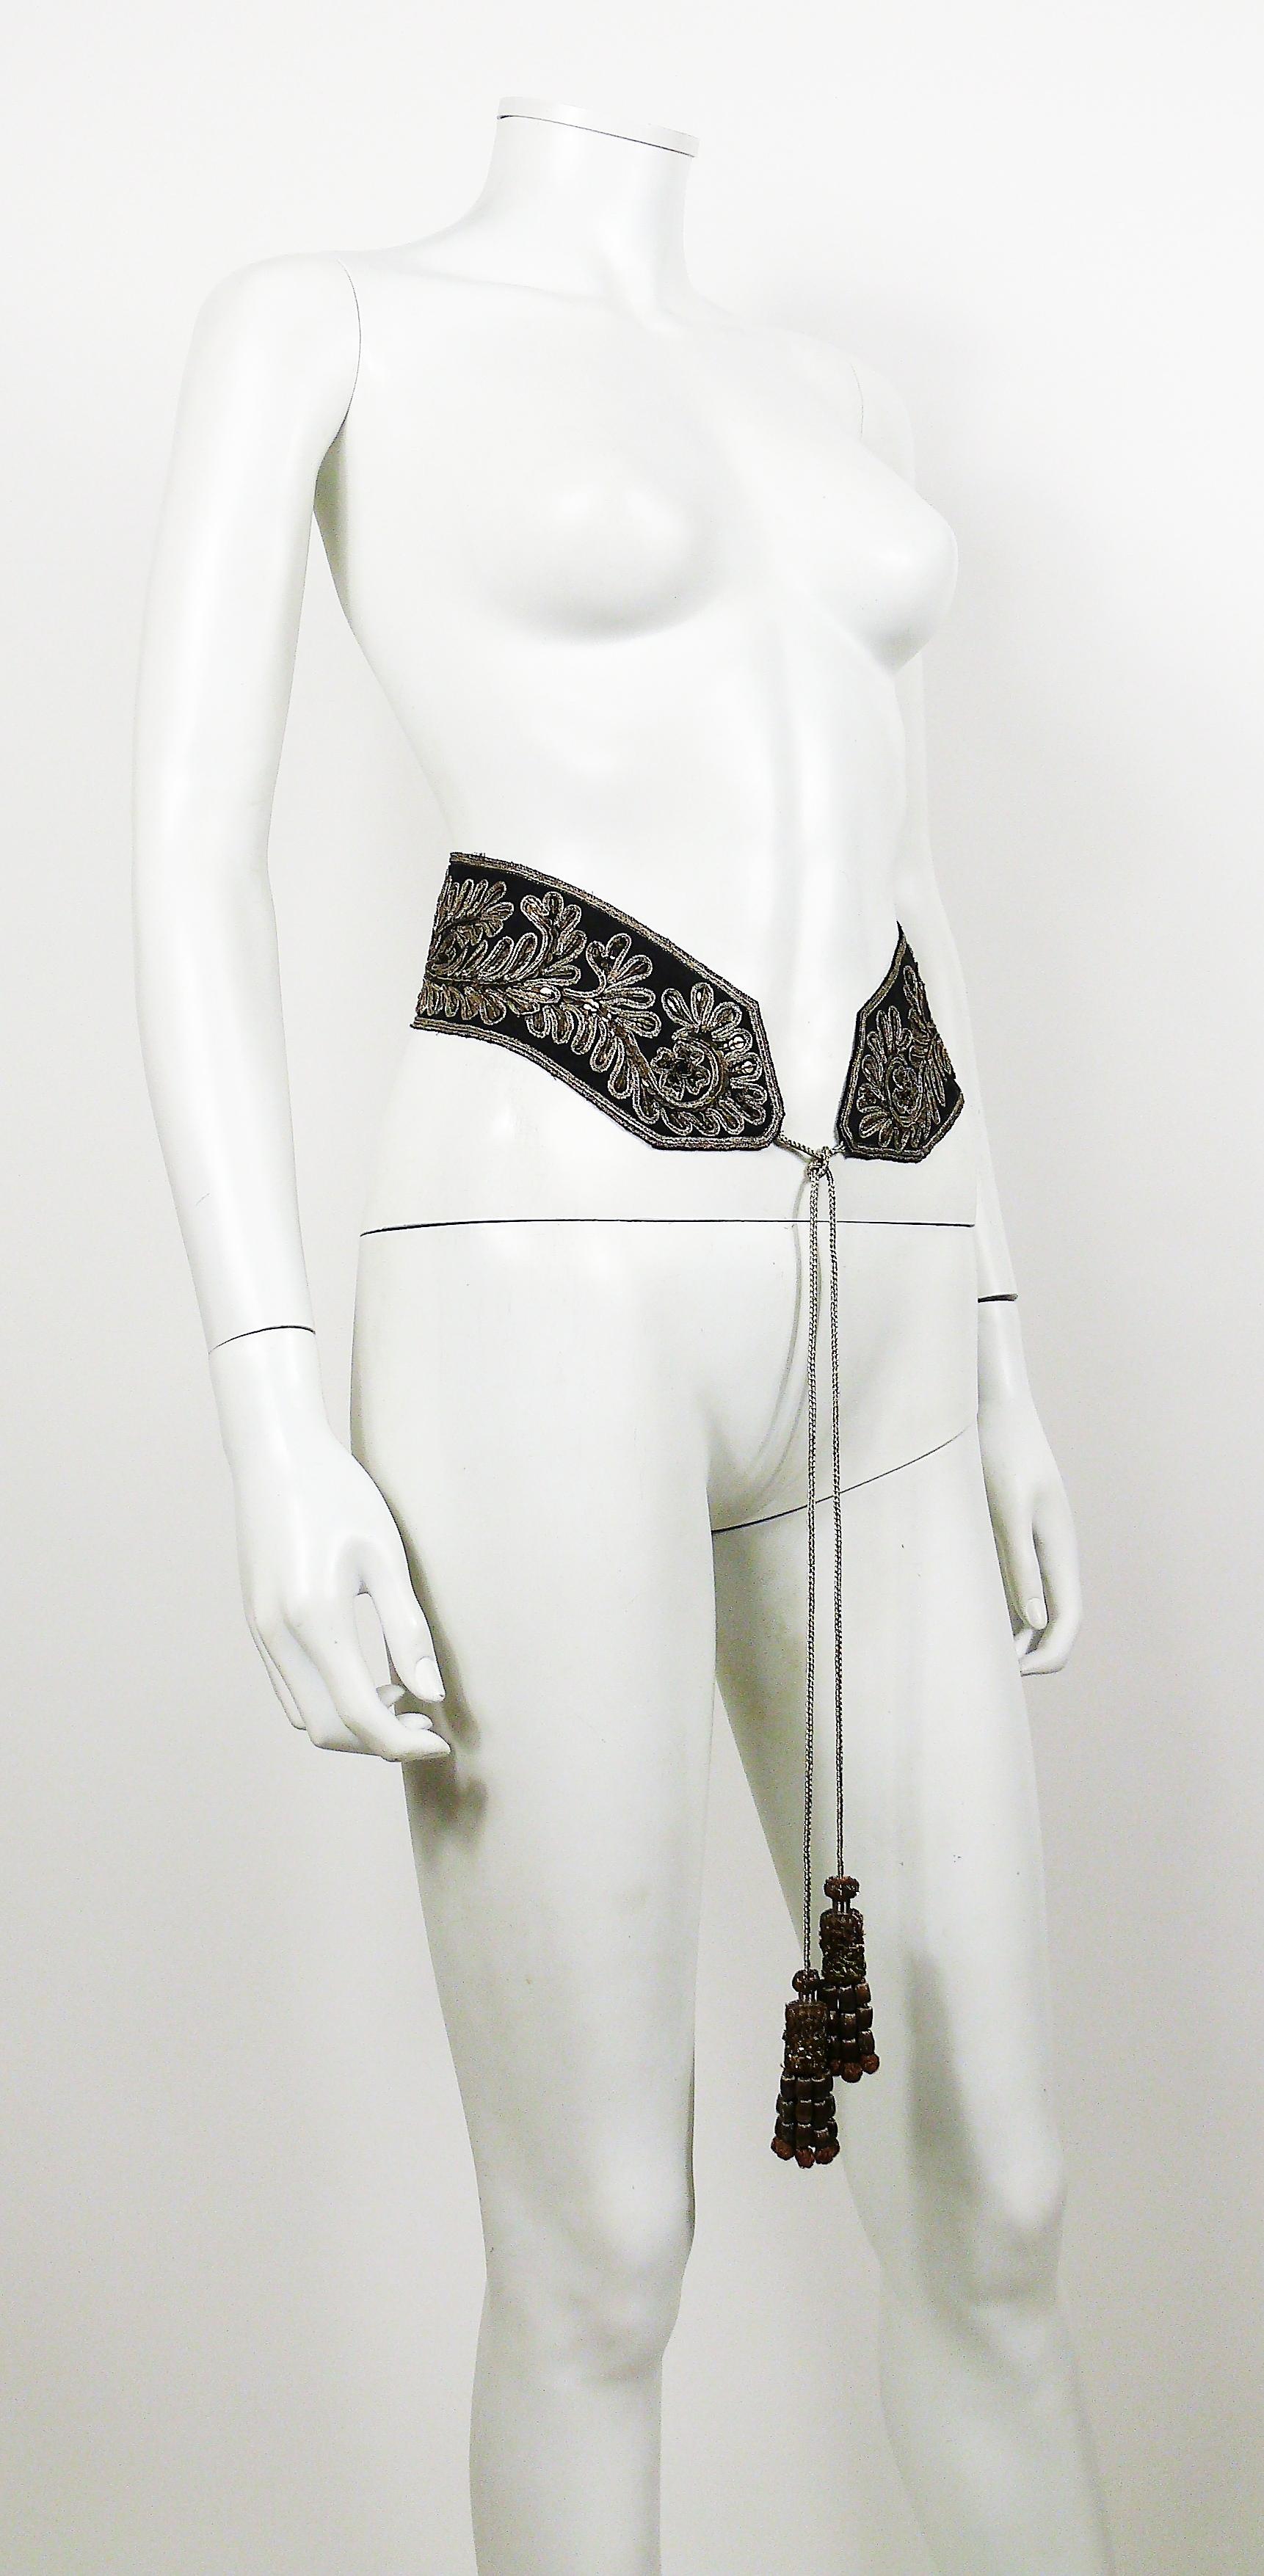 Christian Lacroix vintage wide sequined obi belt embellished with embroideries and tassels.

Black lining.

Marked CHRISTIAN LACROIX.

One size fits all.

Indicative measurements : length (excluding ties and tassels) approx. 68 cm (26.77 inches) /